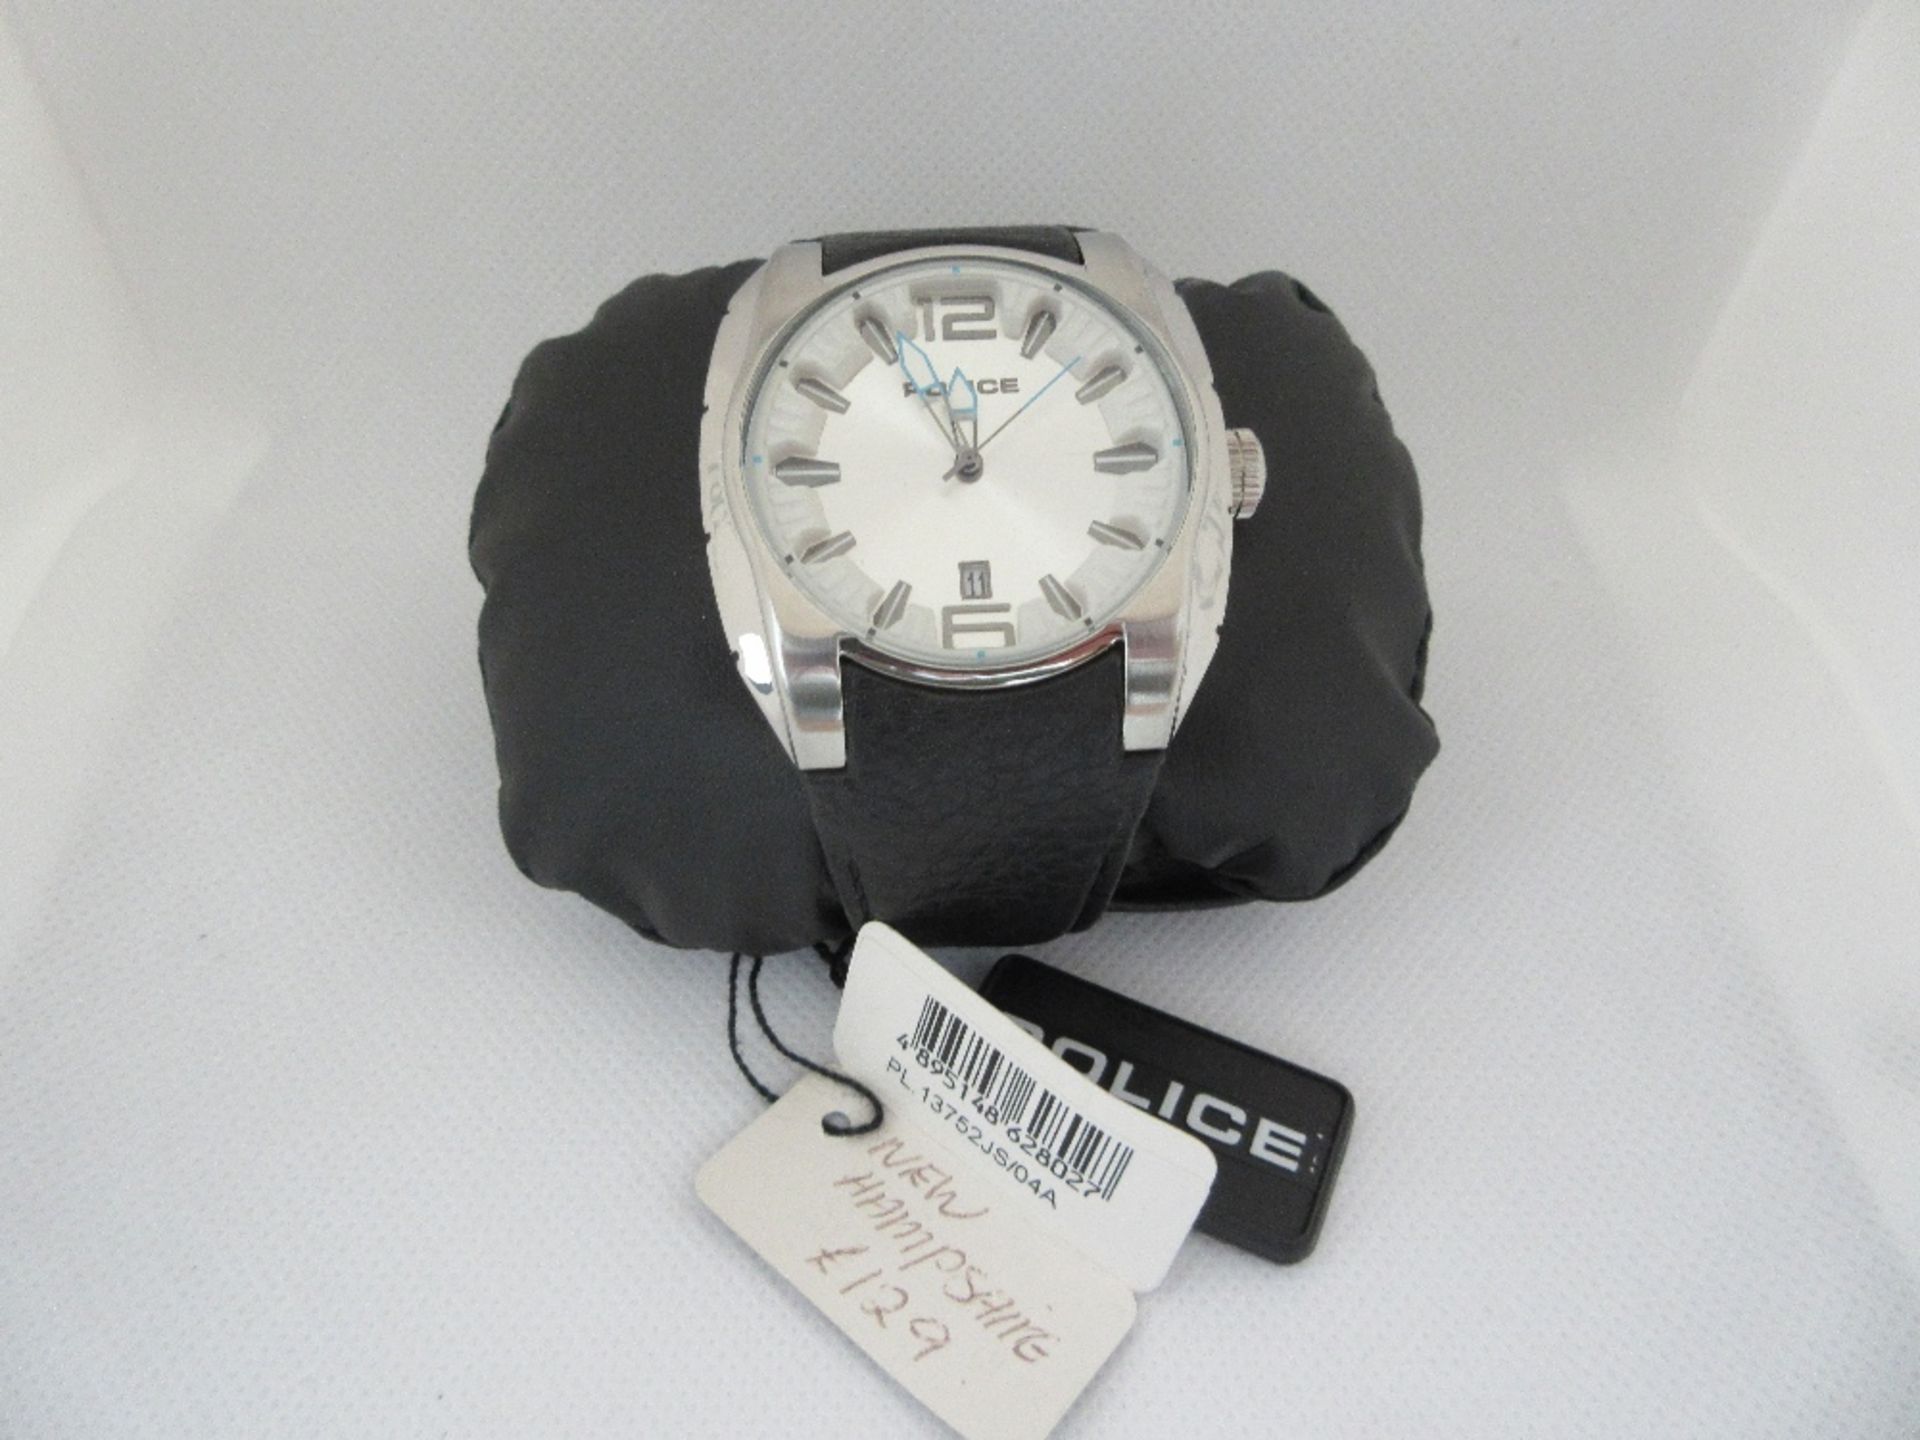 POLICE MALE WATCH, MODEL 13752JS/04A, CASE DIAMETER 46MM, LEATHER STRAP, BOXED, RRP £ 129 - Image 2 of 4